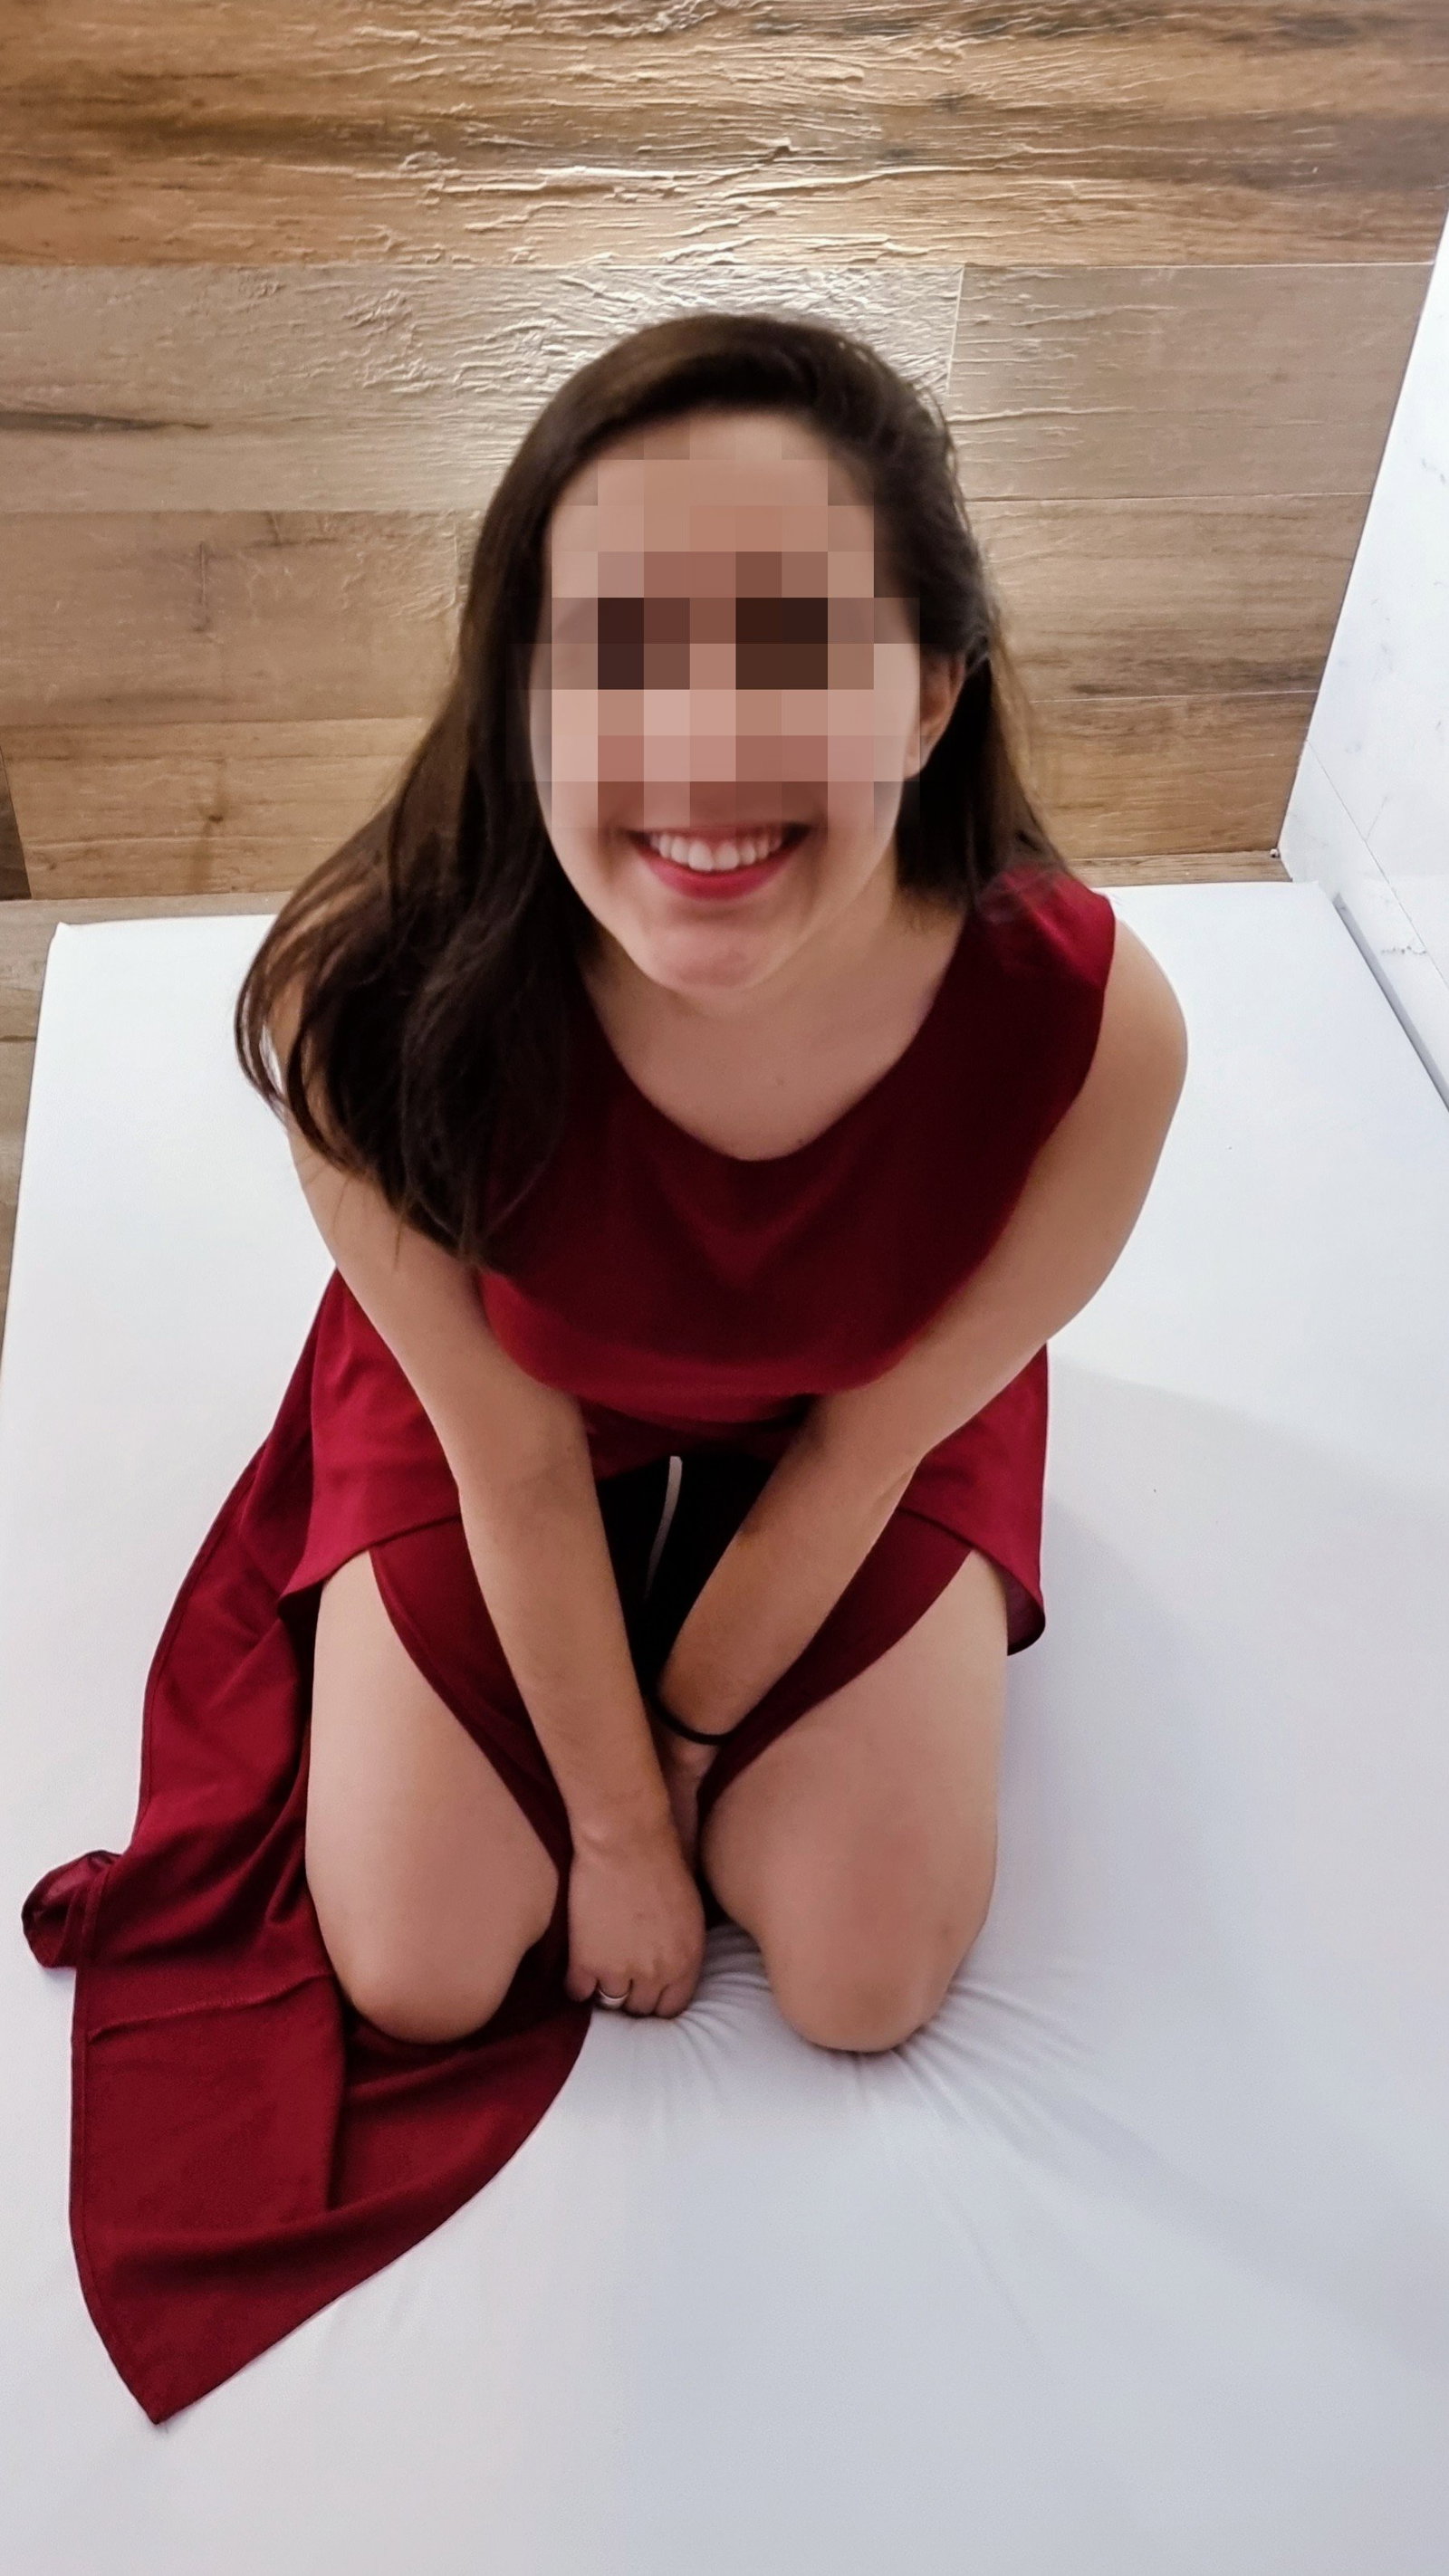 Watch the Photo by magicouple with the username @magicouple, who is a star user, posted on May 4, 2022. The post is about the topic Your Naughty Girlfriend. and the text says 'What do you think she is waiting for? 🤔🤔🤔

Check our page on #fancentro and #onlyfans too 😉

#amateur #sex #wife #hot #teen'